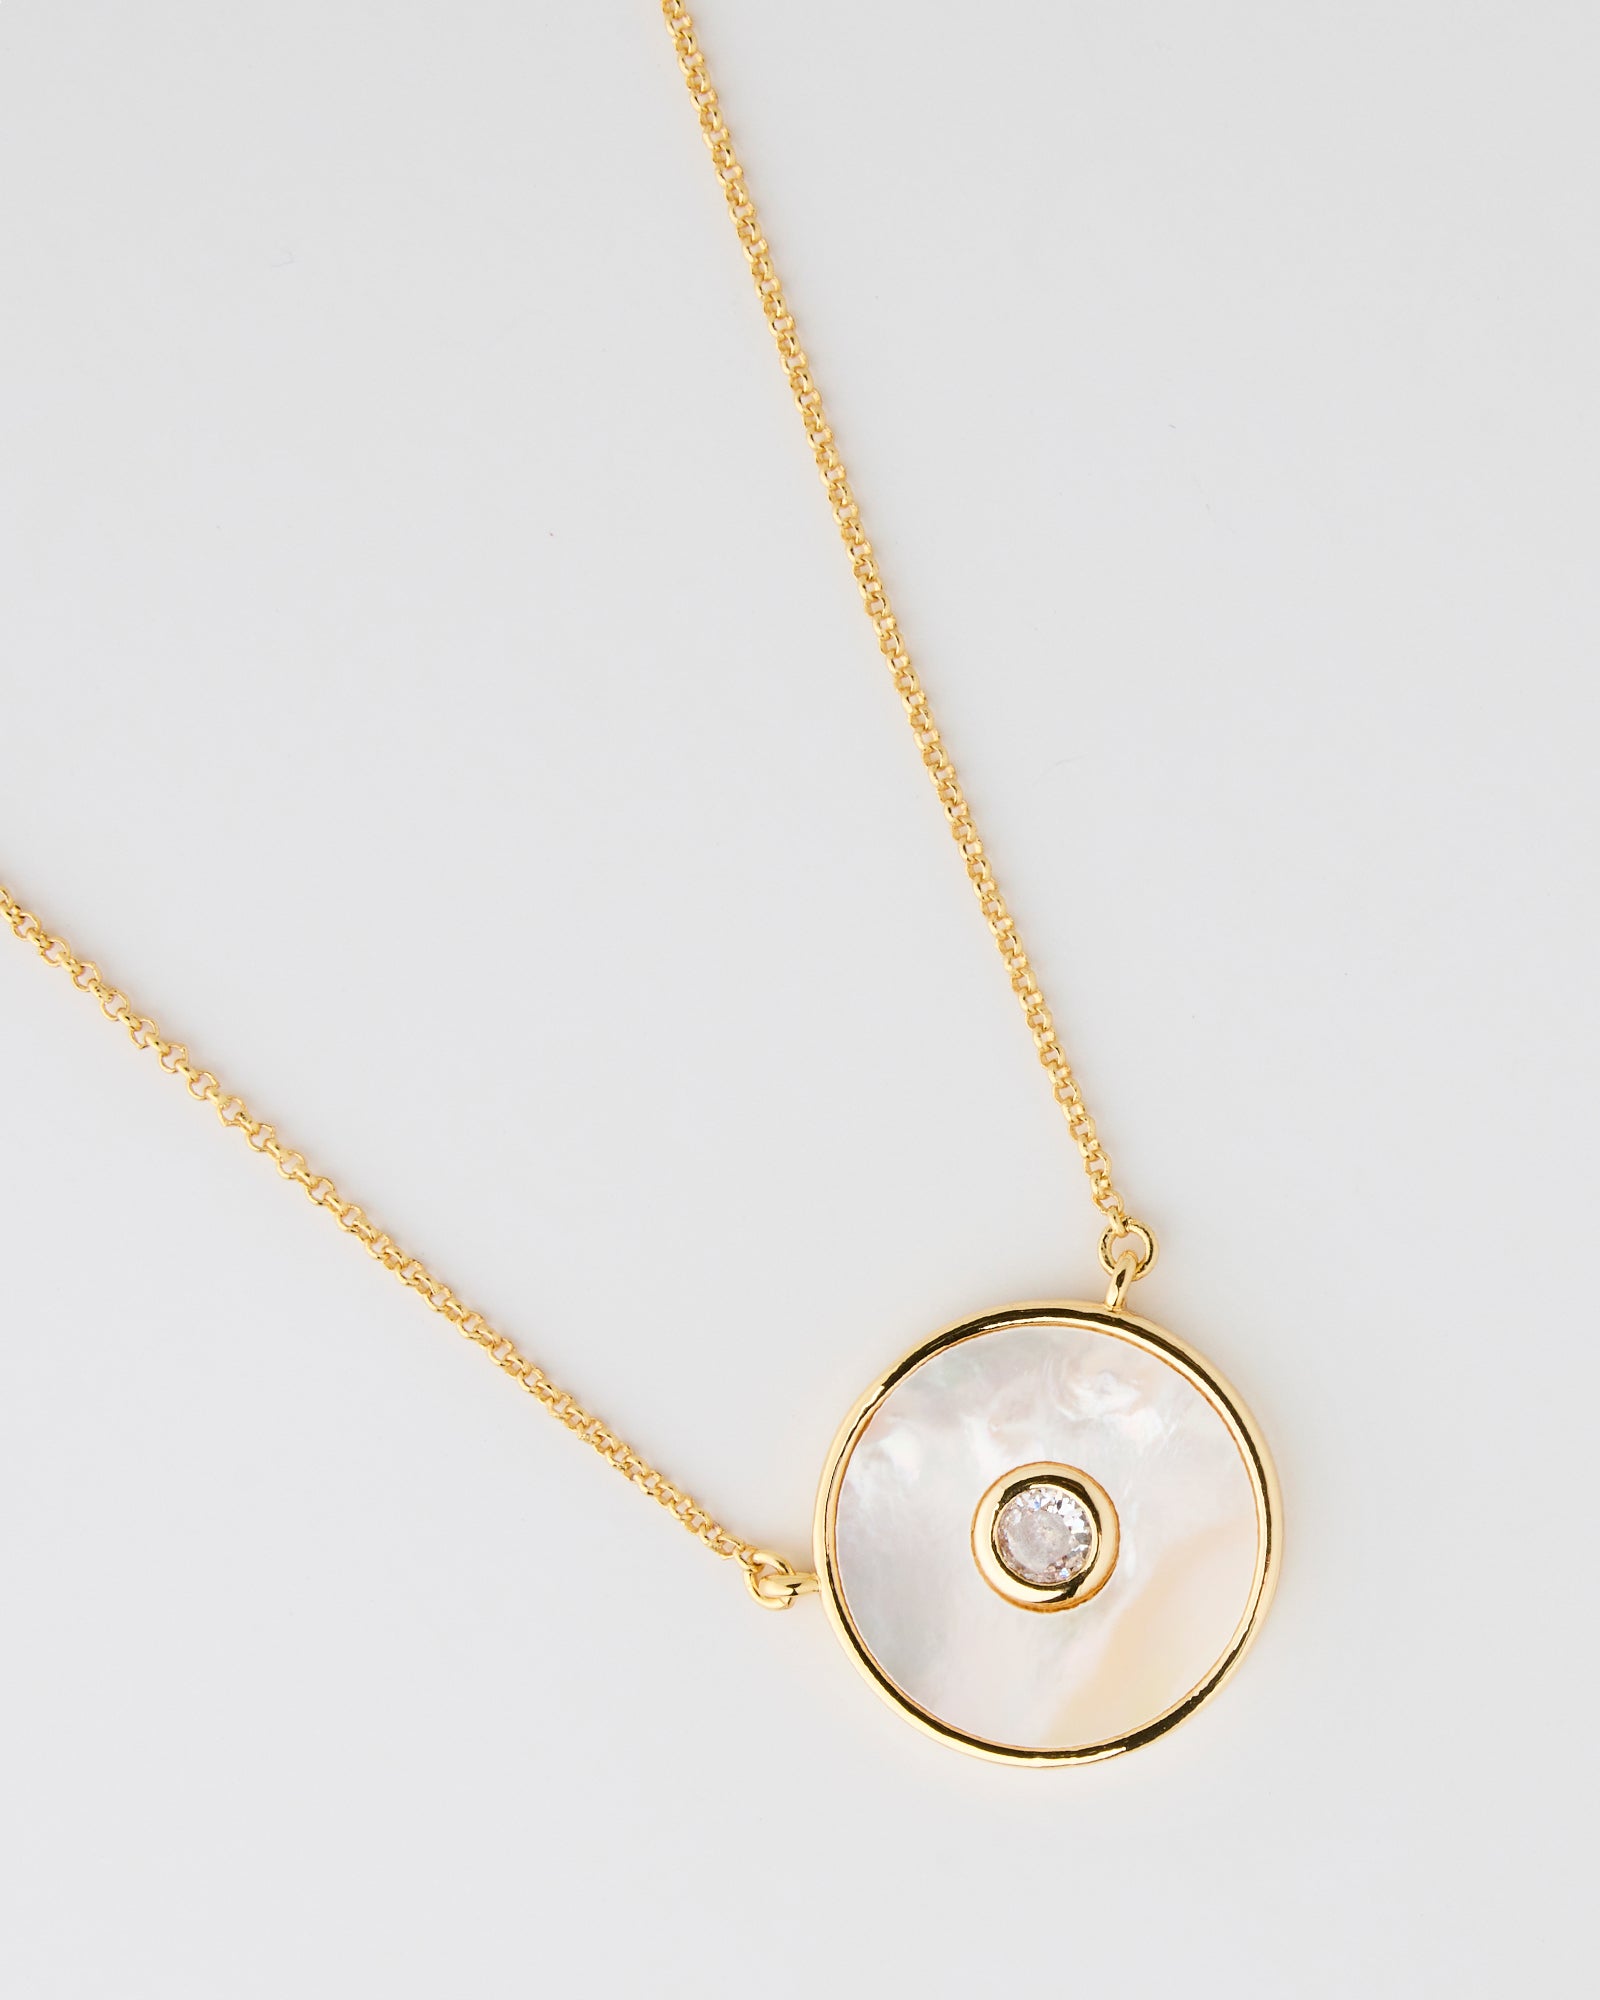 Gold chain necklace with circle pendant